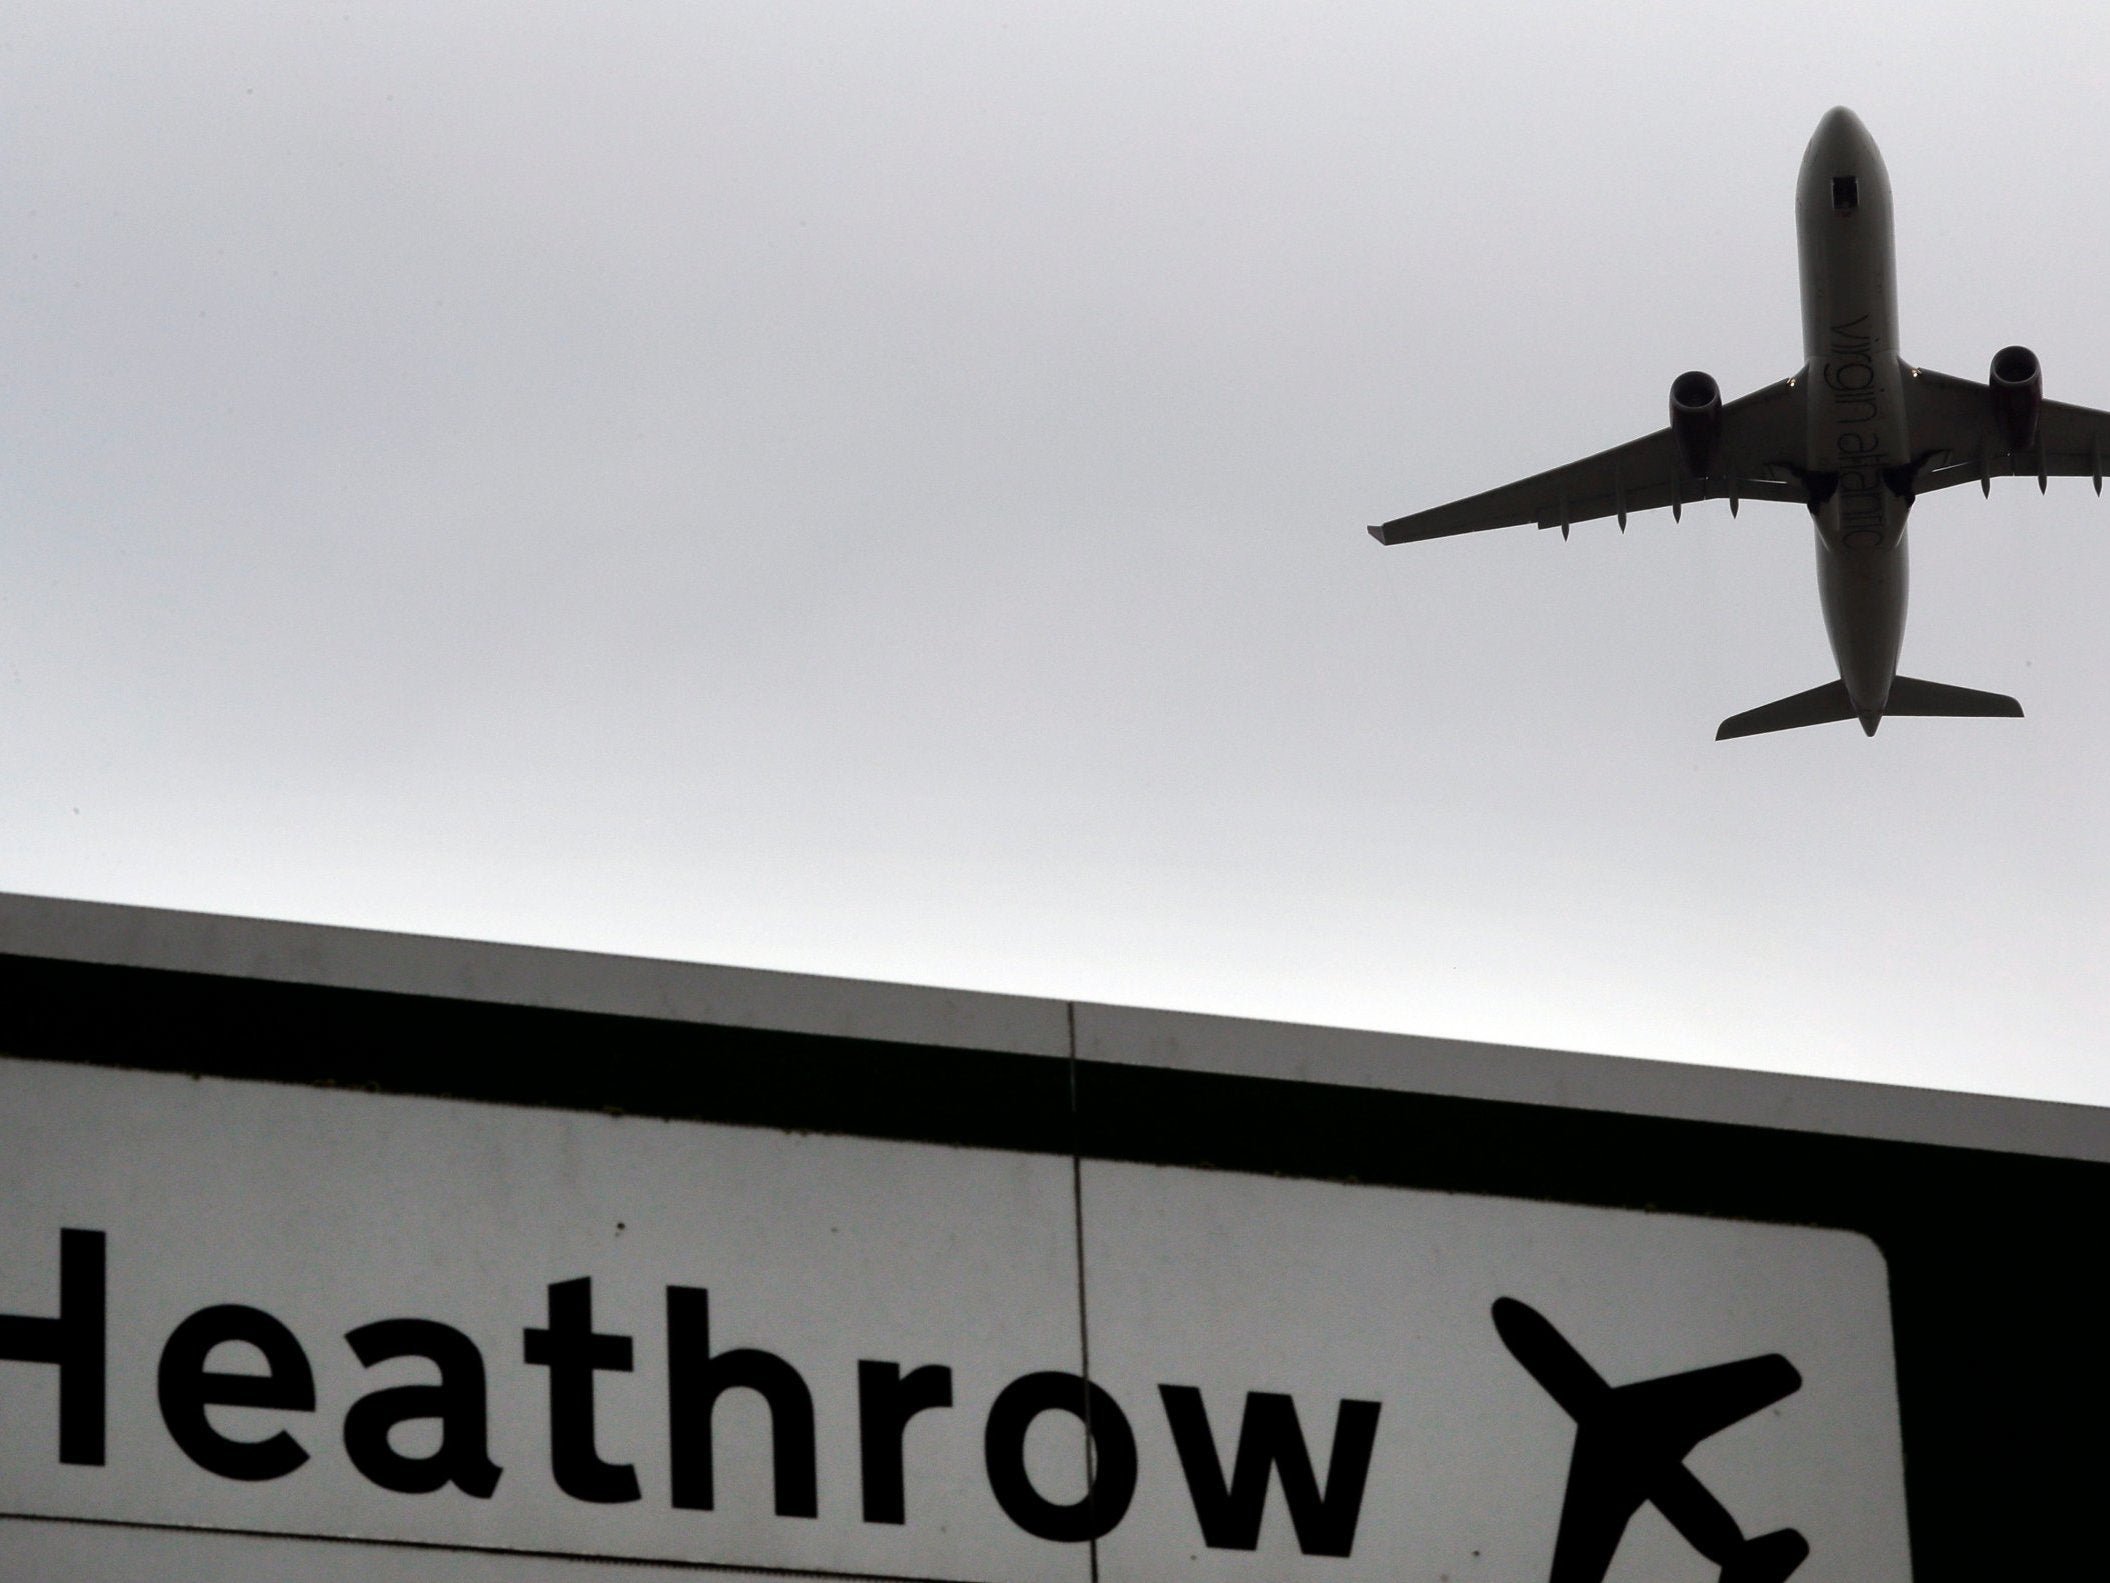 The alleged offence took place days after drone chaos at Gatwick grounded 1,000 flights